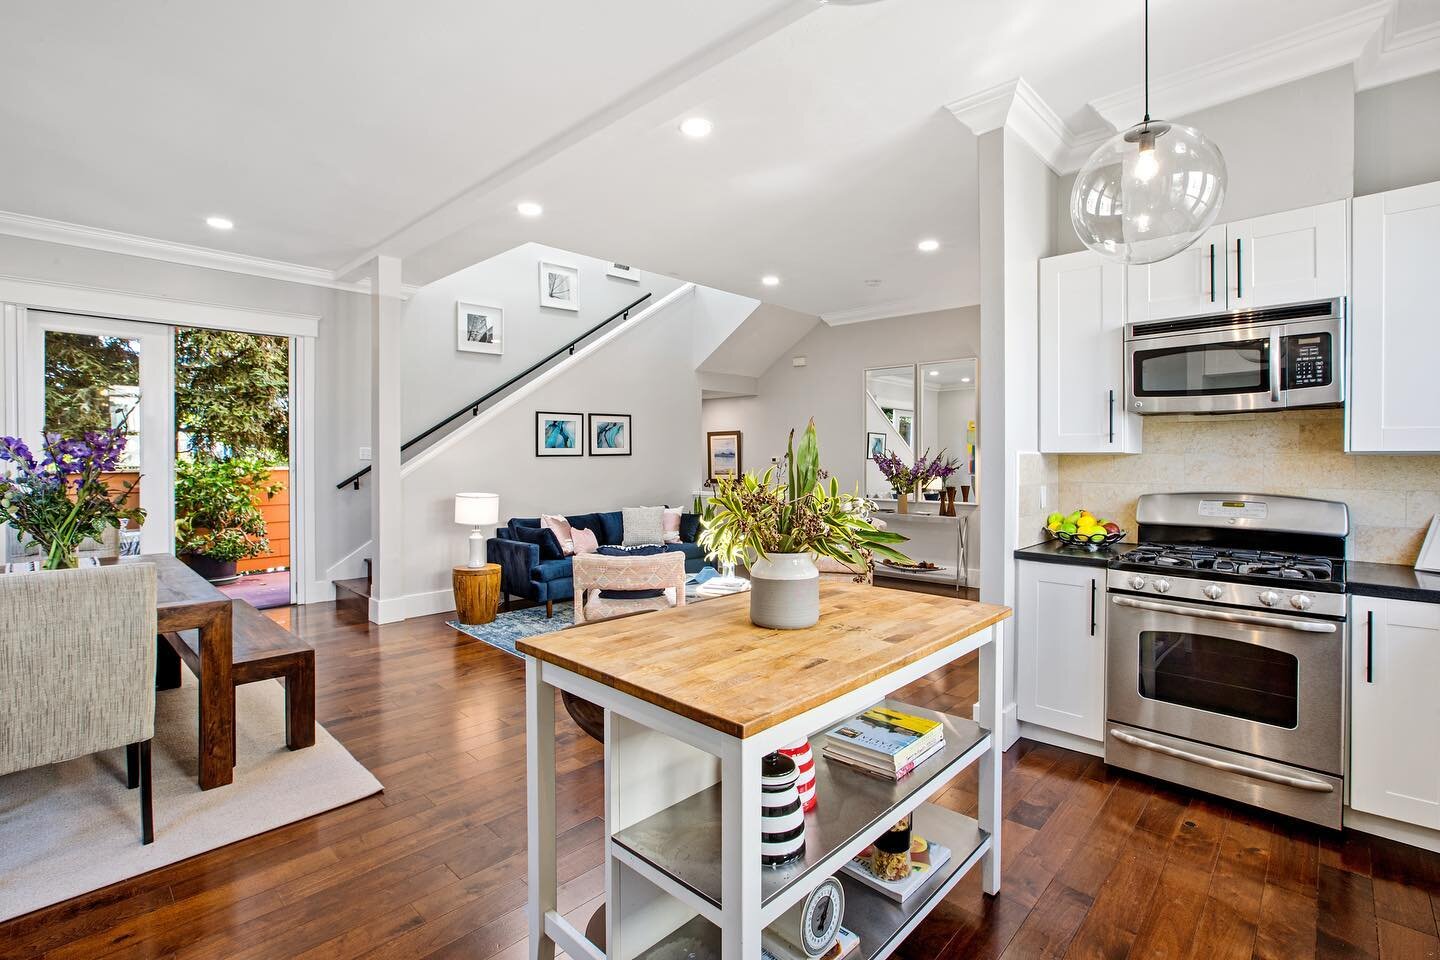 ✨JUST LISTED✨

1085 60th | Oakland
2 BED | 1.5 BATH |  1,332 Sq. Ft. 

Offered at $995,000

Constructed in 2008 this single-family residence was one of eight new homes built in NOBE (North Oakland, Berkeley, and Emeryville); in a leafy, quiet, intima